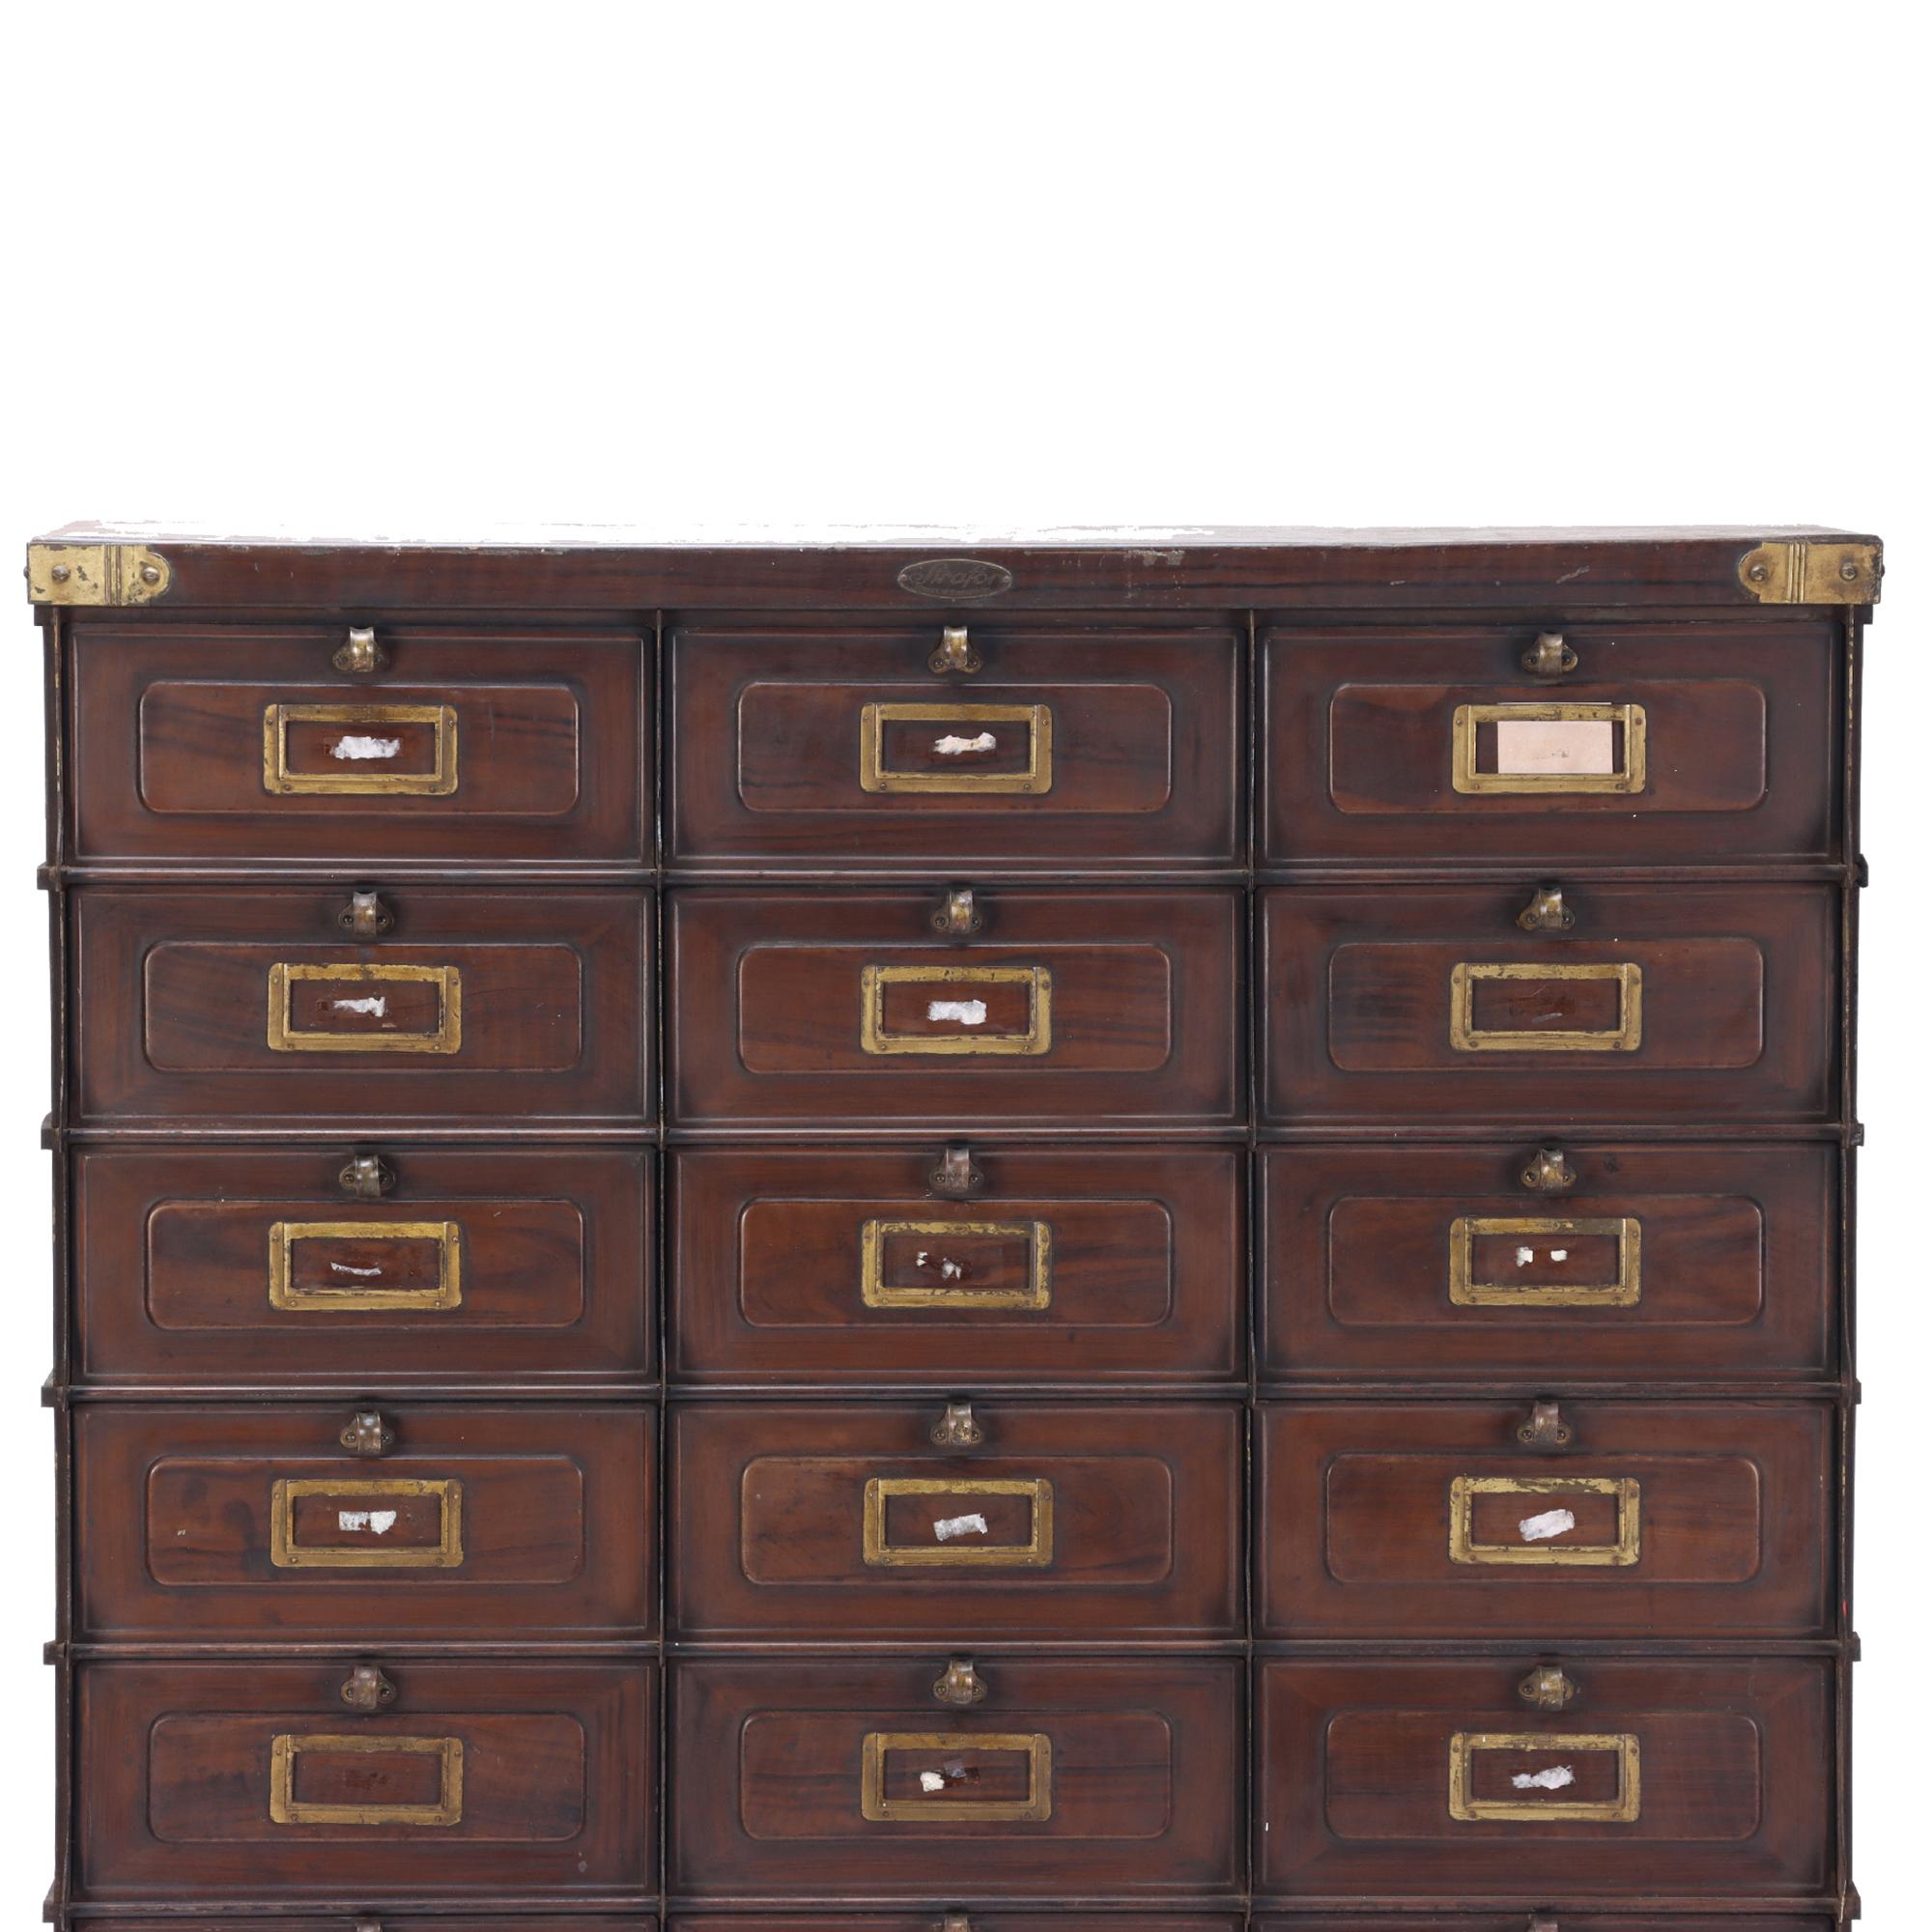 Brown steel apothecary-style cabinet with 30 individual drawers, made in France by Strafor, Forge de Strasbourg. The substantial, circa 1920 cabinet is beautifully forged with intriguing details, including brass accents on the drawer fronts as well